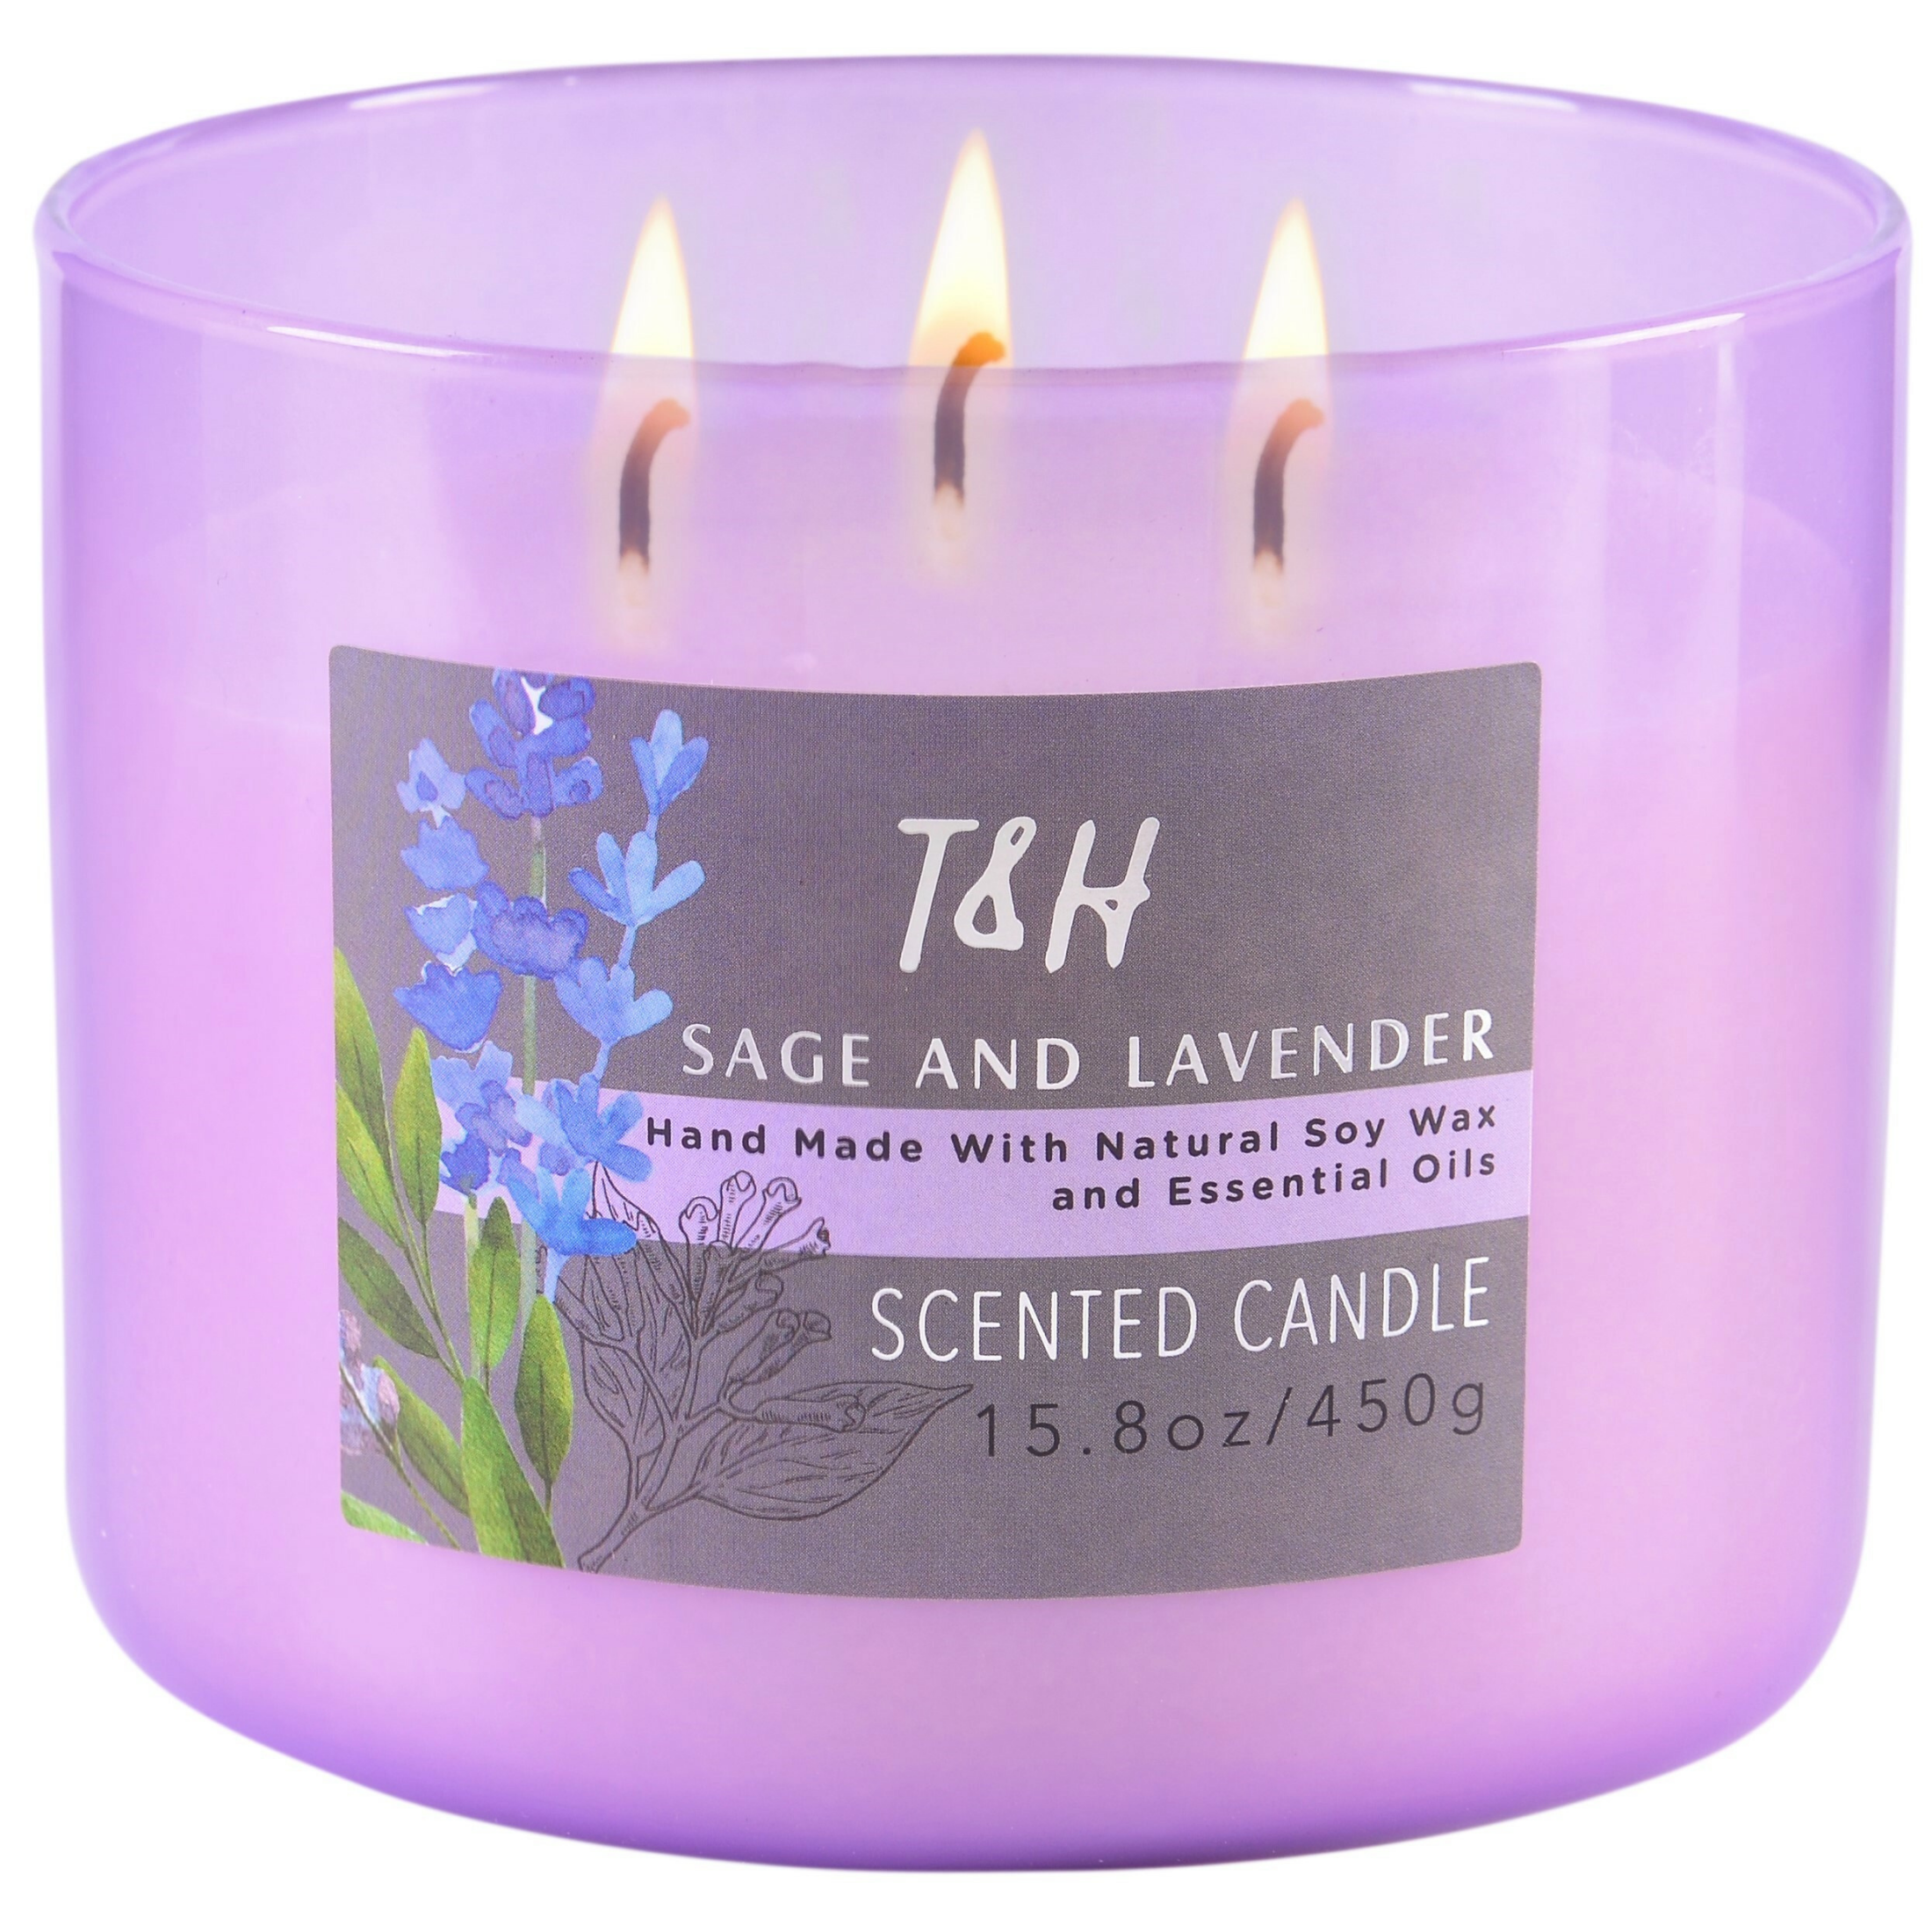 T&H Sage Lavender 3 Wick Scented Candle | Natural Soy Wax Candle for Home, 15.8 Oz Large Aromatherapy Candle for Relaxation